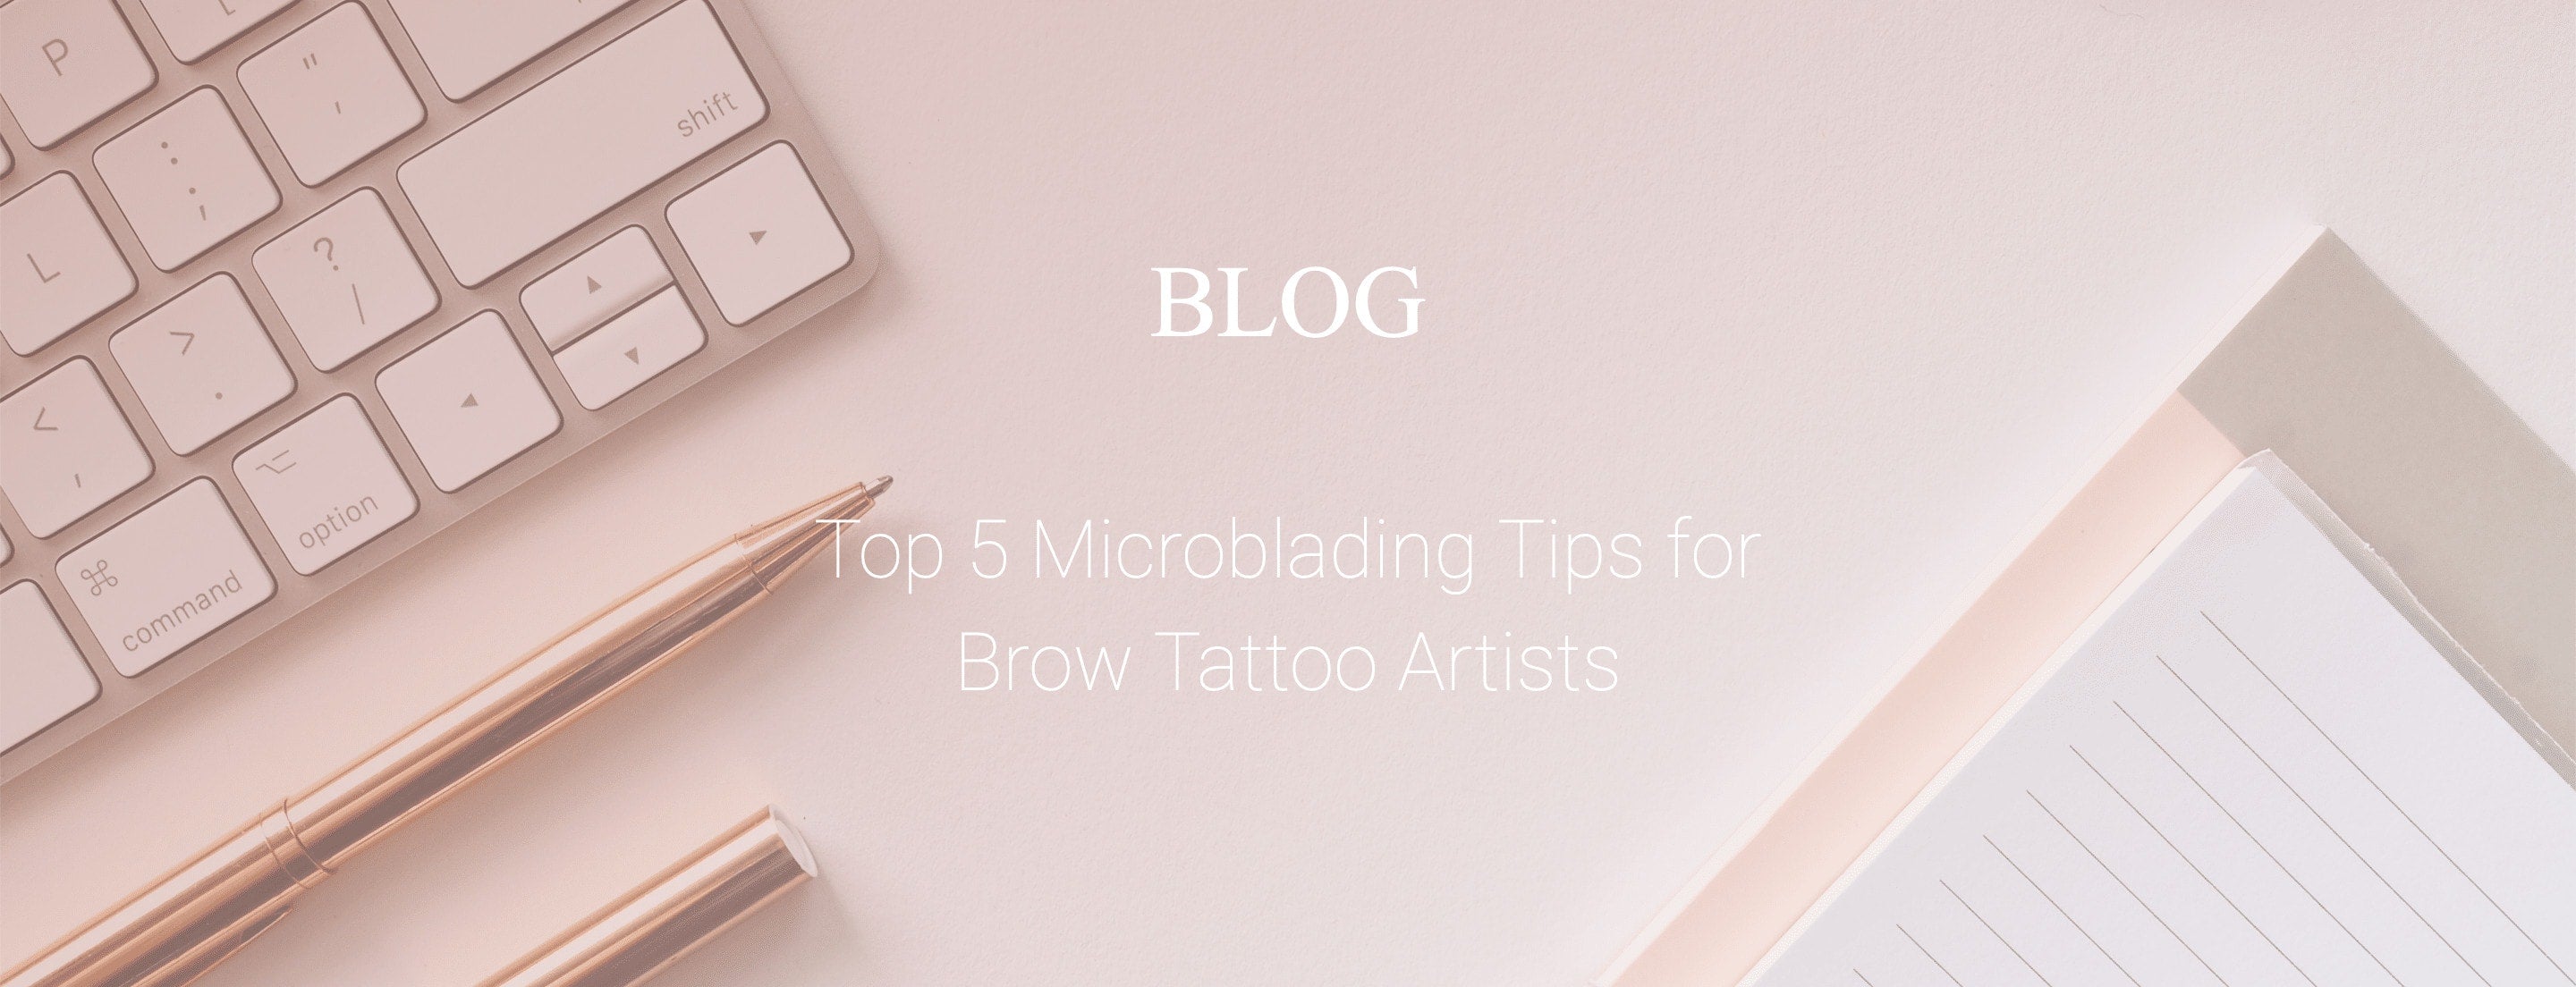 Top 5 Microblading Tips